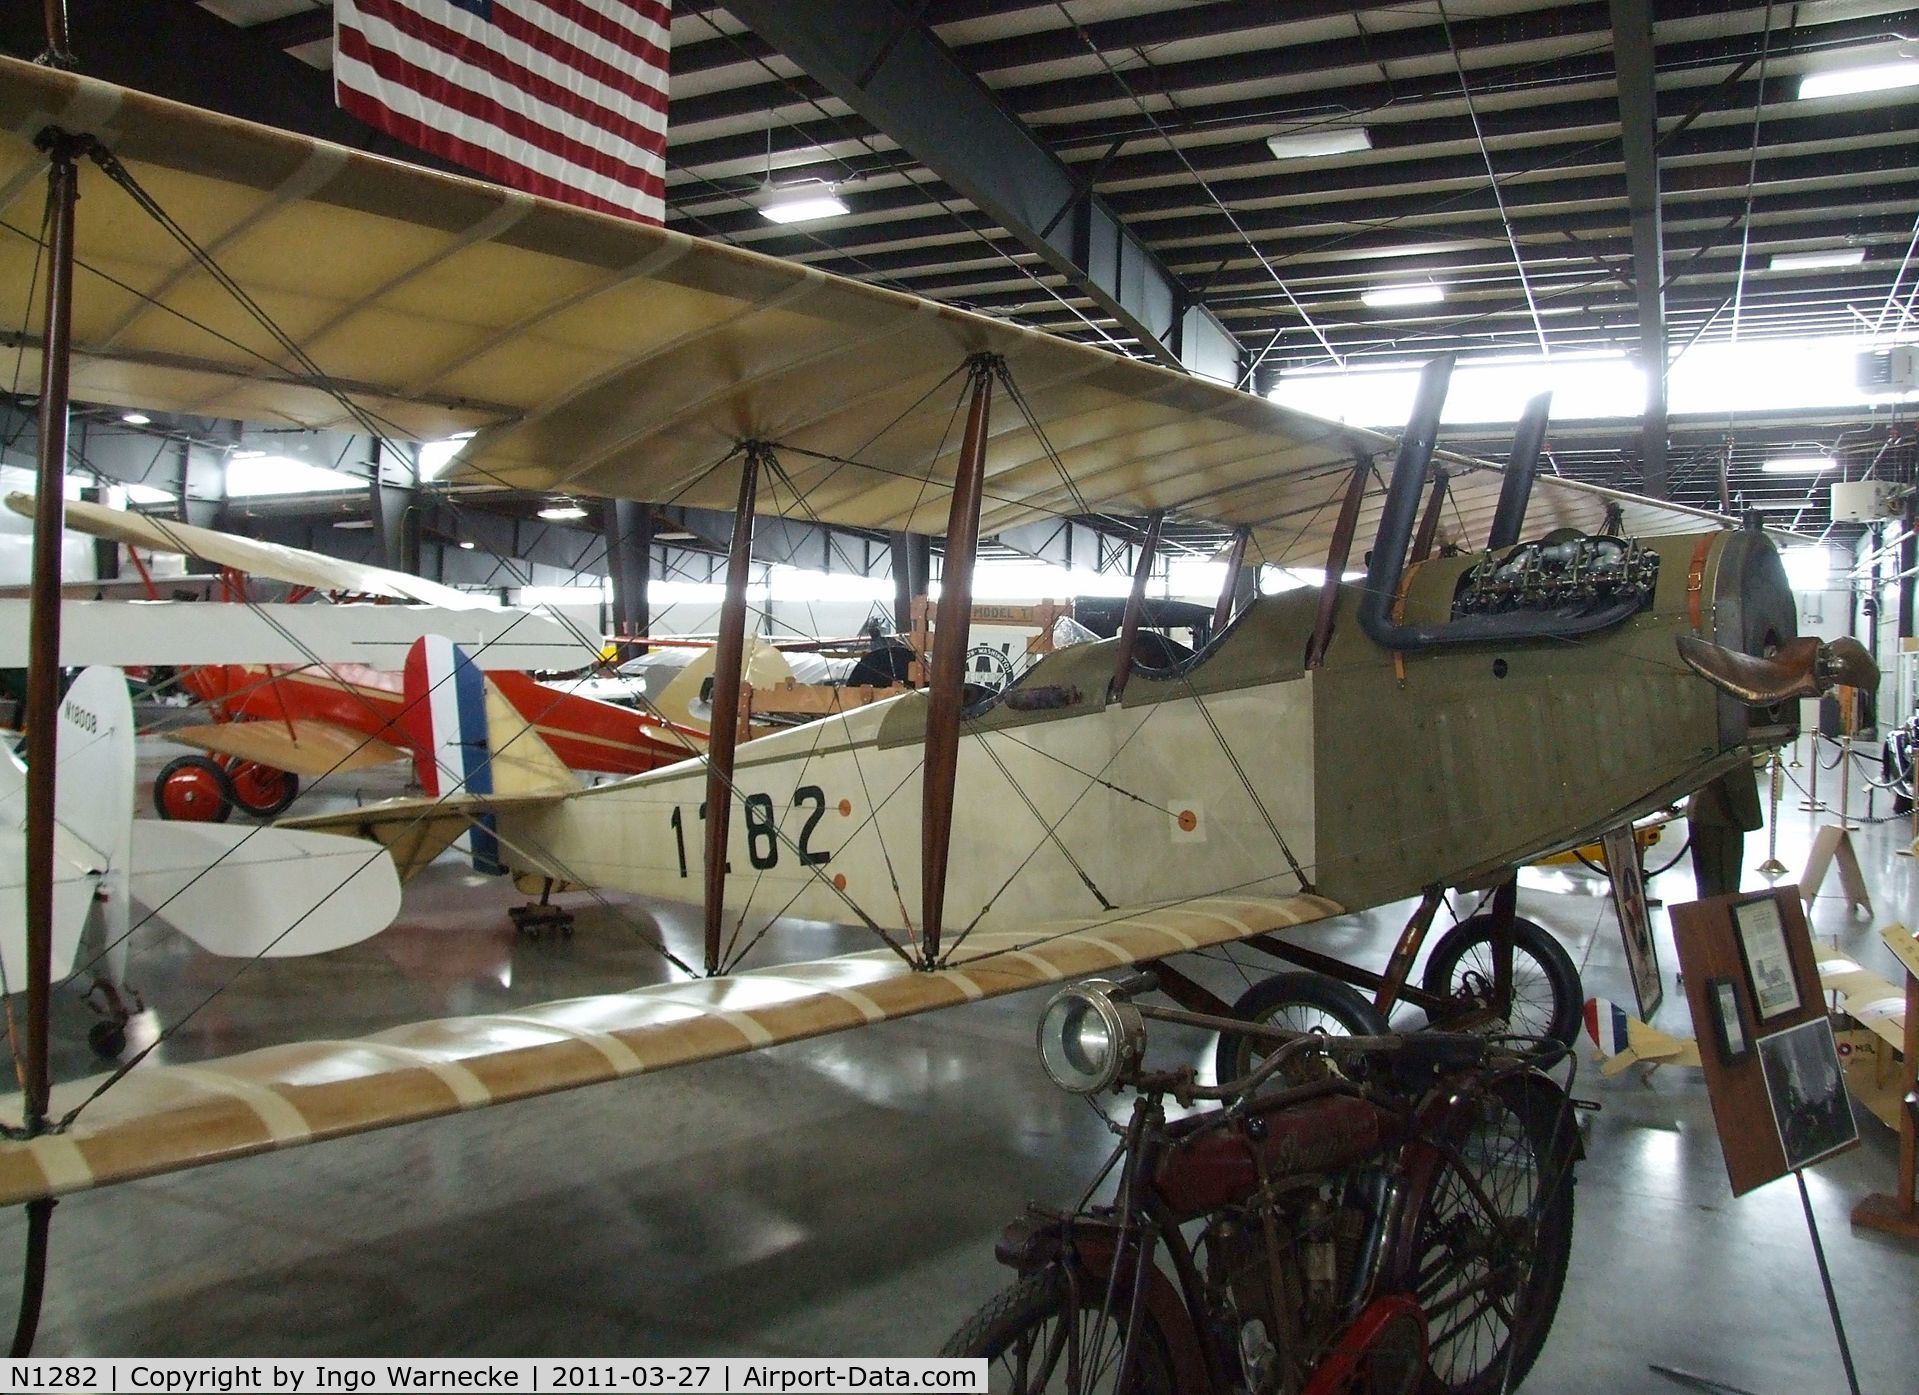 N1282, 1917 Curtiss JN-4D Jenny C/N 1, Curtiss JN-4D at the Western Antique Aeroplane and Automobile Museum, Hood River OR